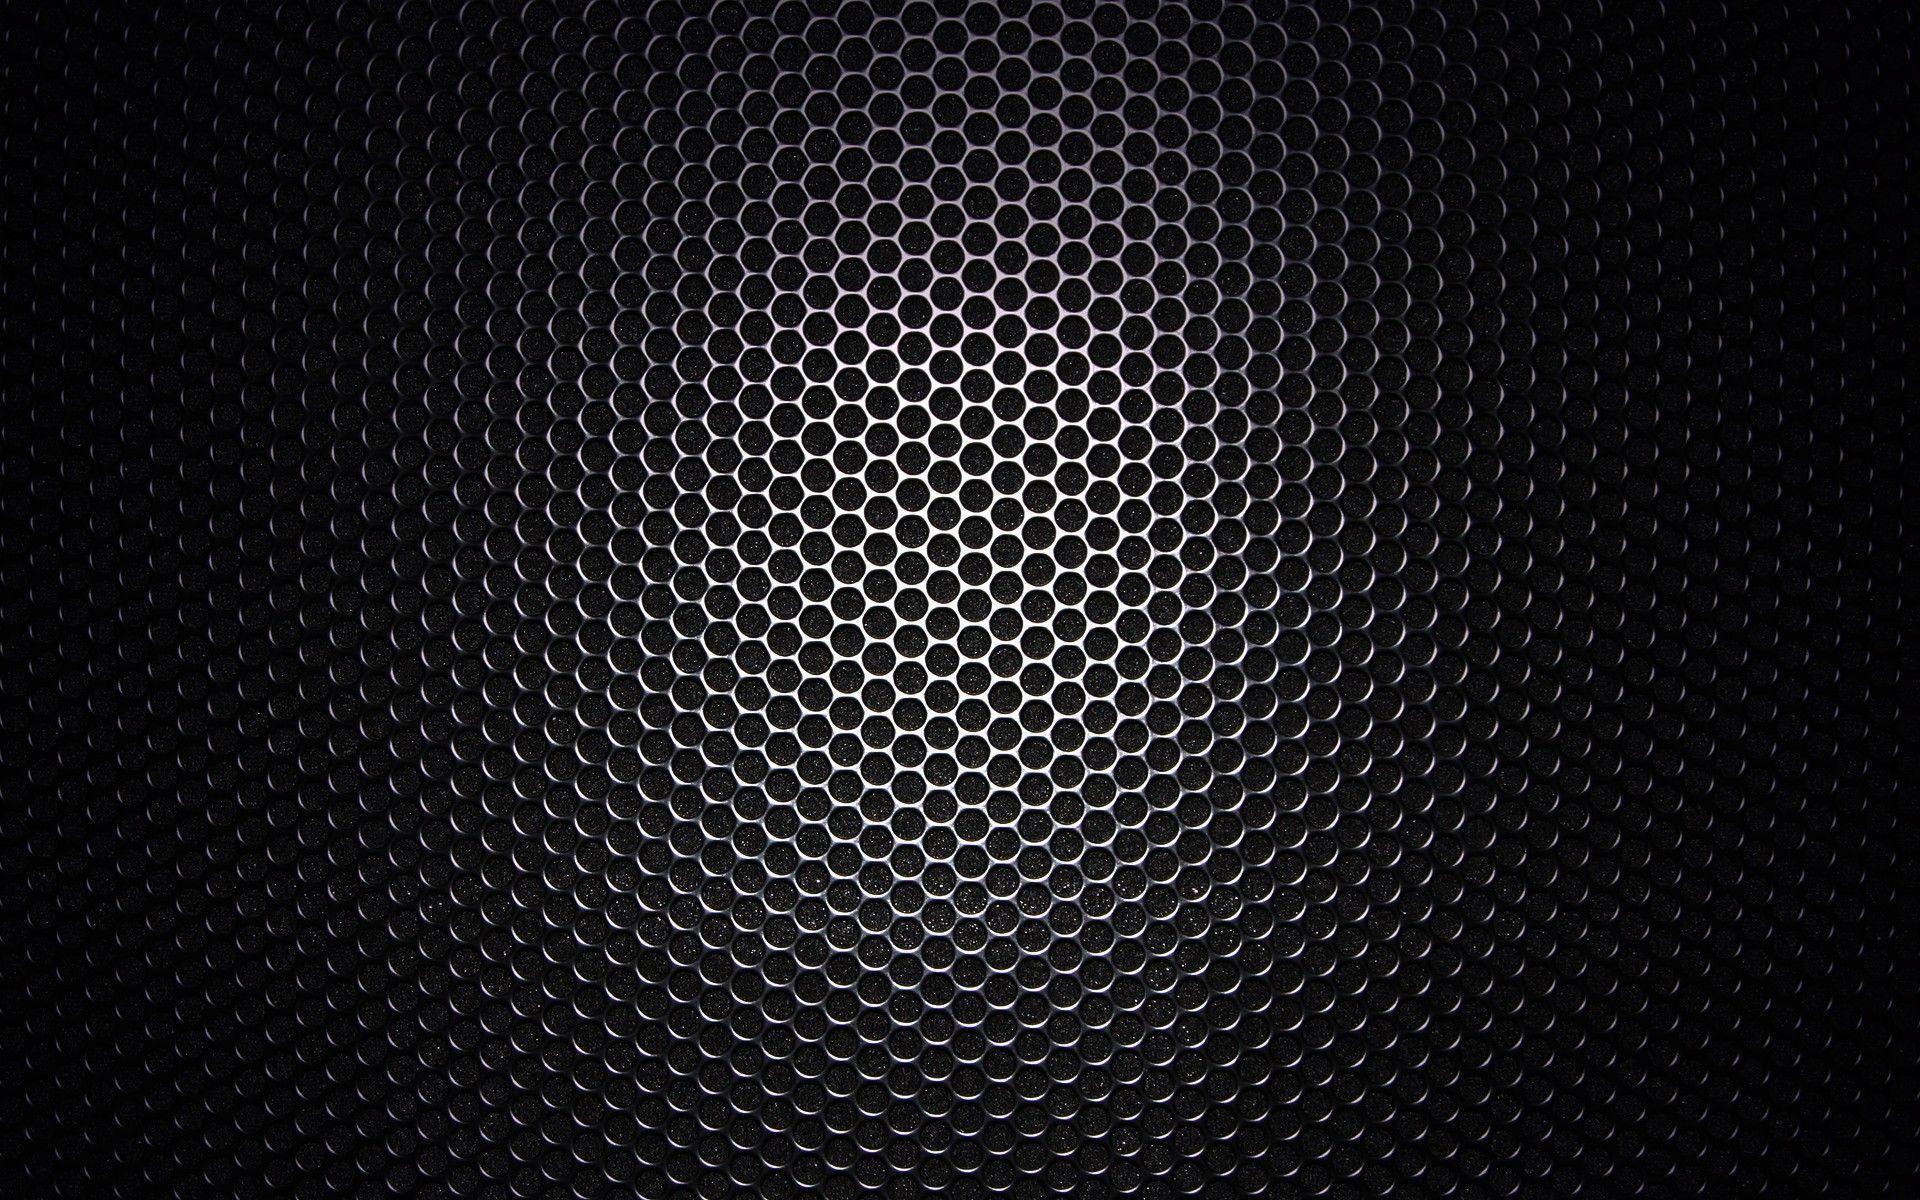 Cool Black Background : 50+ Cool Black Background Wallpaper on WallpaperSafari / All of these